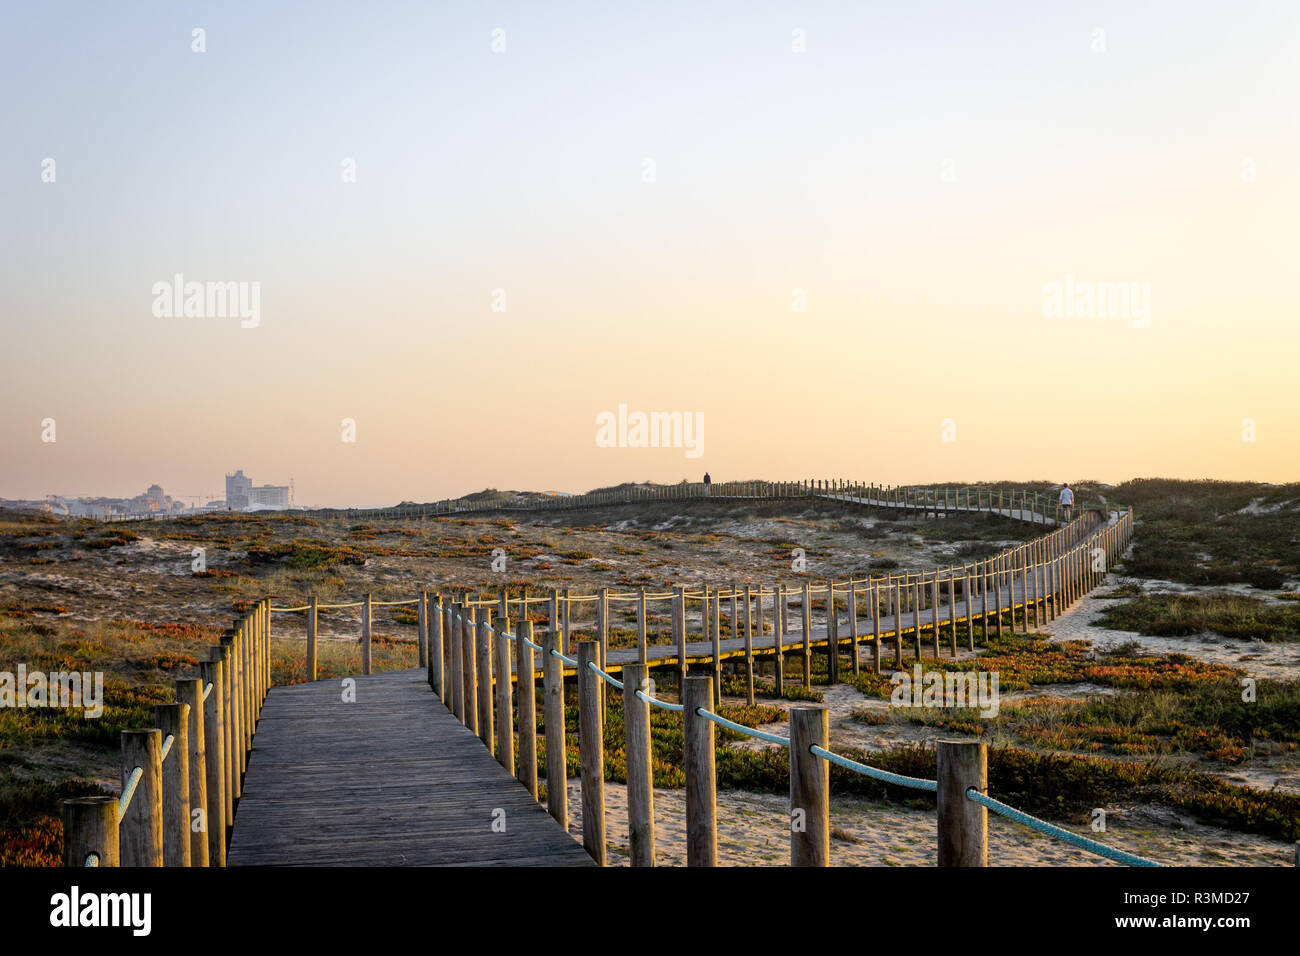 Boardwalk amidst vegetation leads to distant city. Copy space. Clear day. Warm light. Stock Photo